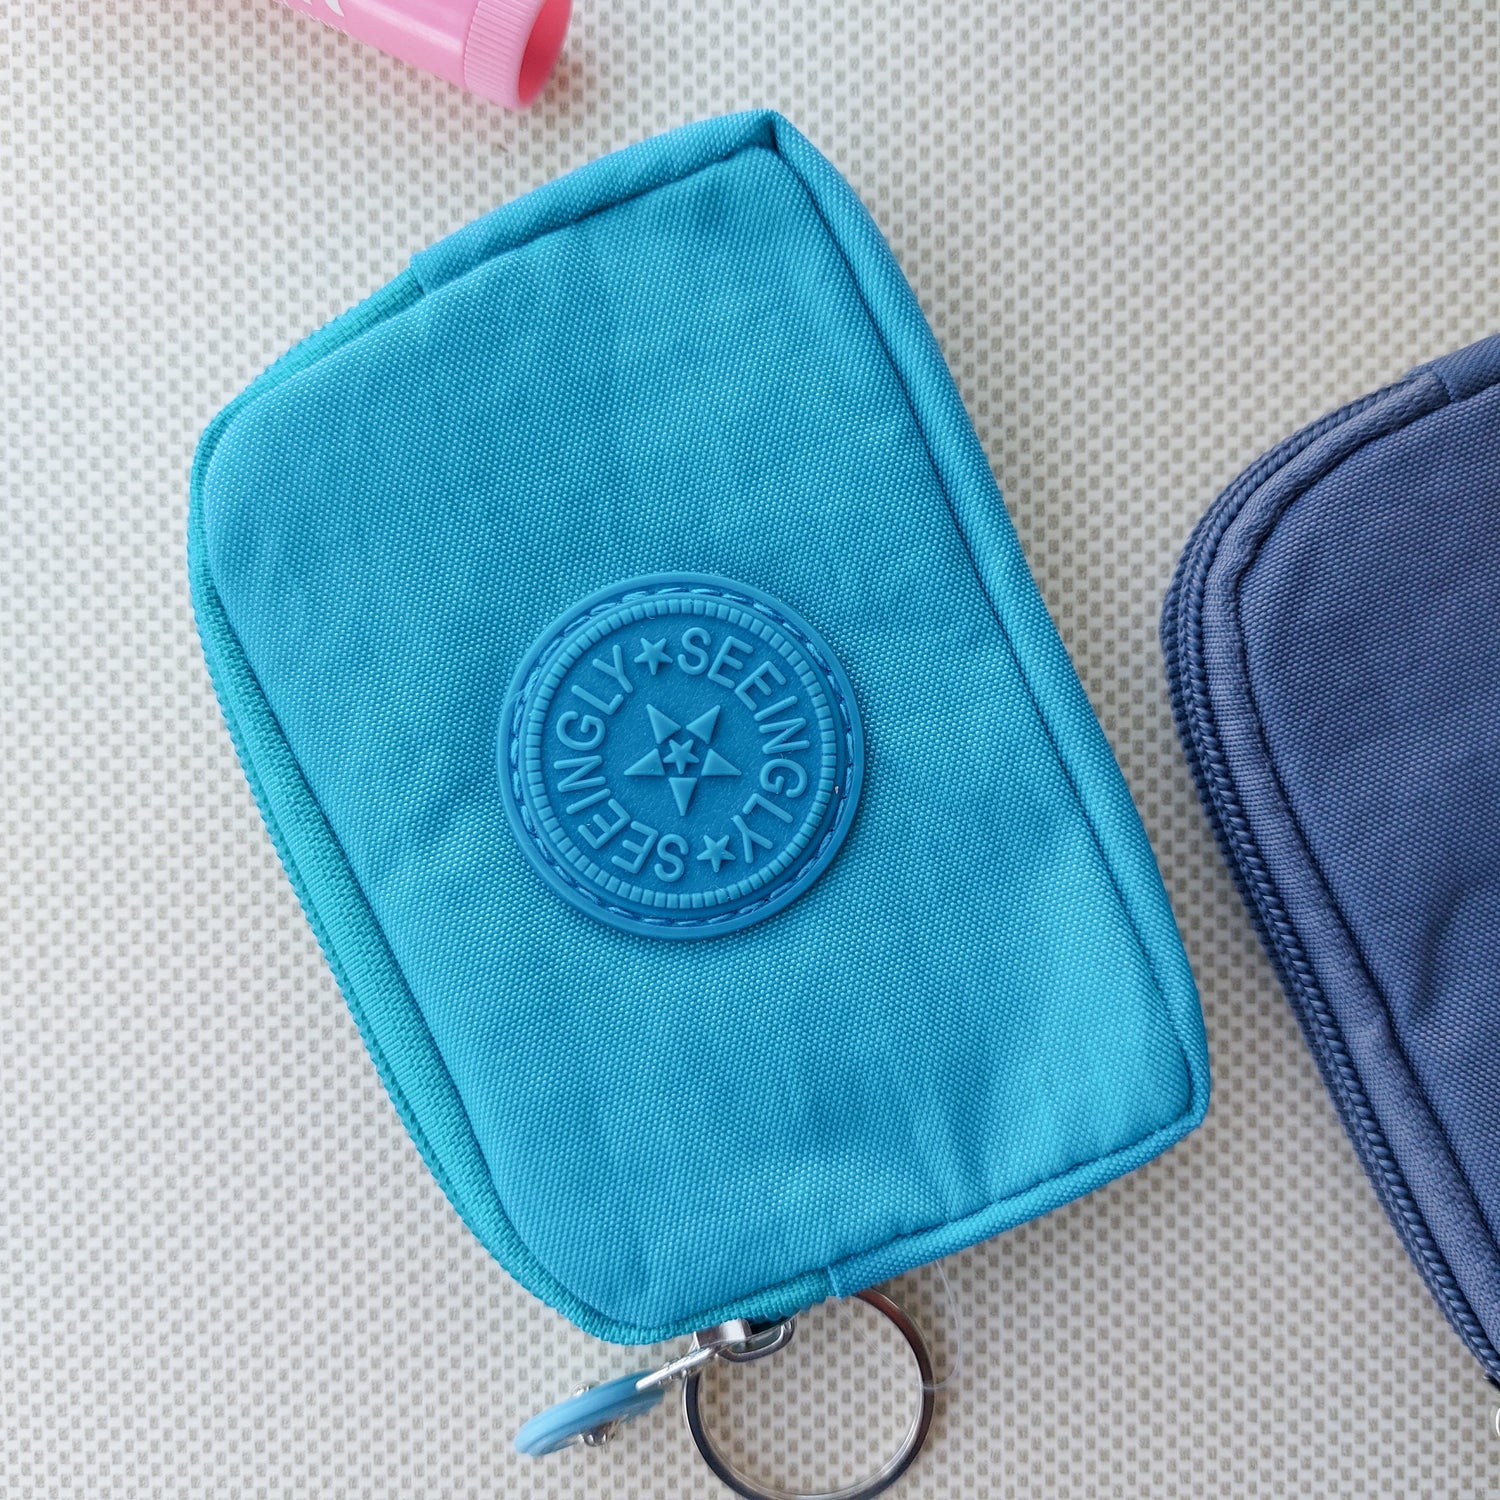 Seeingly Pouches Green and Blue 1 Zip